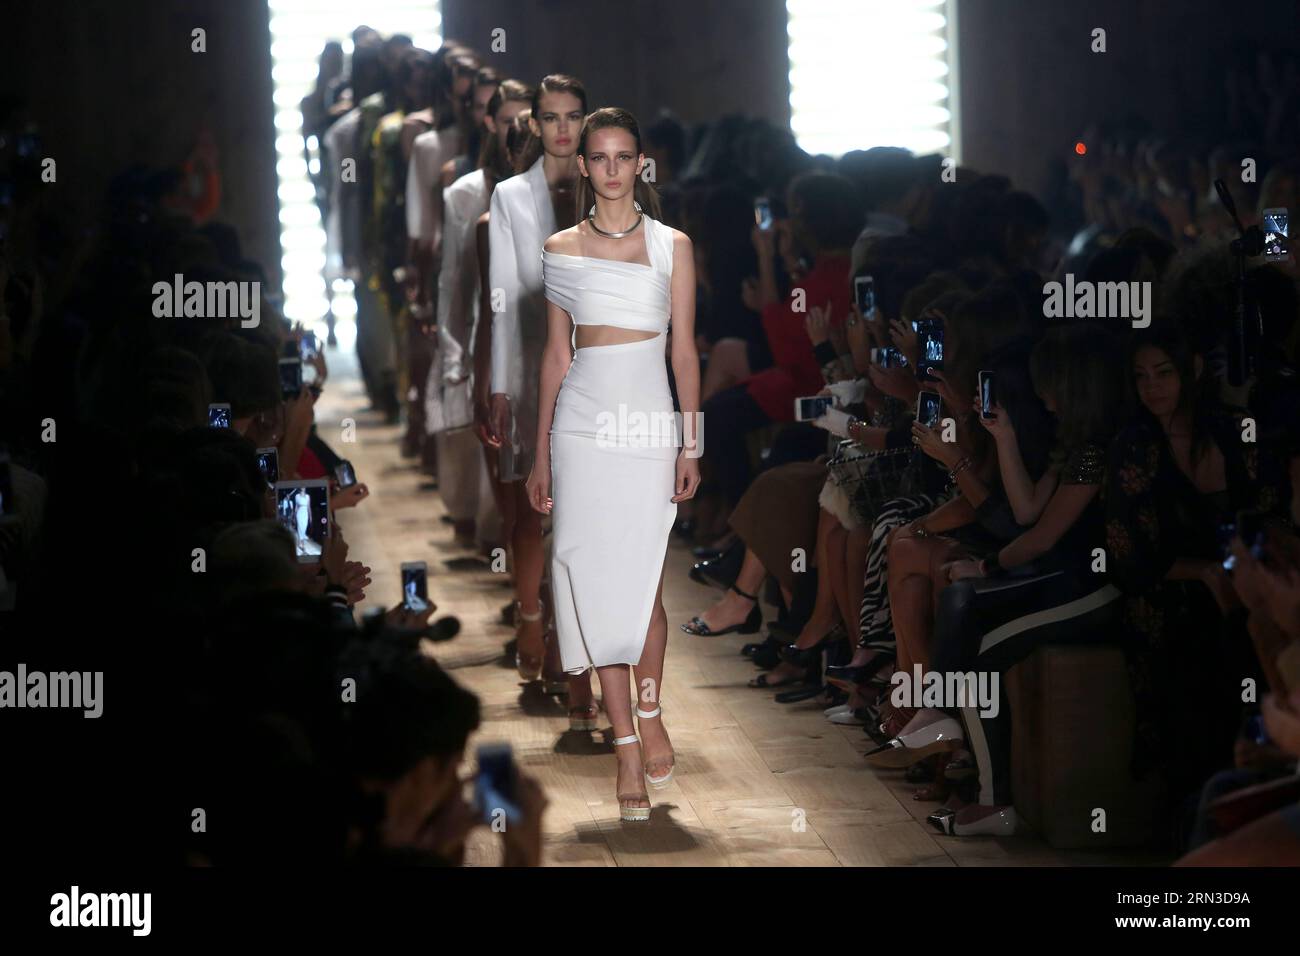 (150413) -- SAO PAULO, April 13, 2015 -- Models present creations of the Summer Collection of Animale , during the first day of the Sao Paulo s Fashion Week, in Sao Paulo, Brazil, on April 13, 2015. Rahel Patrasso) (da) BRAZIL-SAO PAULO-FASHION-FASHION WEEK e RahelxPatrasso PUBLICATIONxNOTxINxCHN   Sao Paulo April 13 2015 Models Present Creations of The Summer Collection of Animale during The First Day of The Sao Paulo S Fashion Week in Sao Paulo Brazil ON April 13 2015 Rahel  there Brazil Sao Paulo Fashion Fashion Week e  PUBLICATIONxNOTxINxCHN Stock Photo